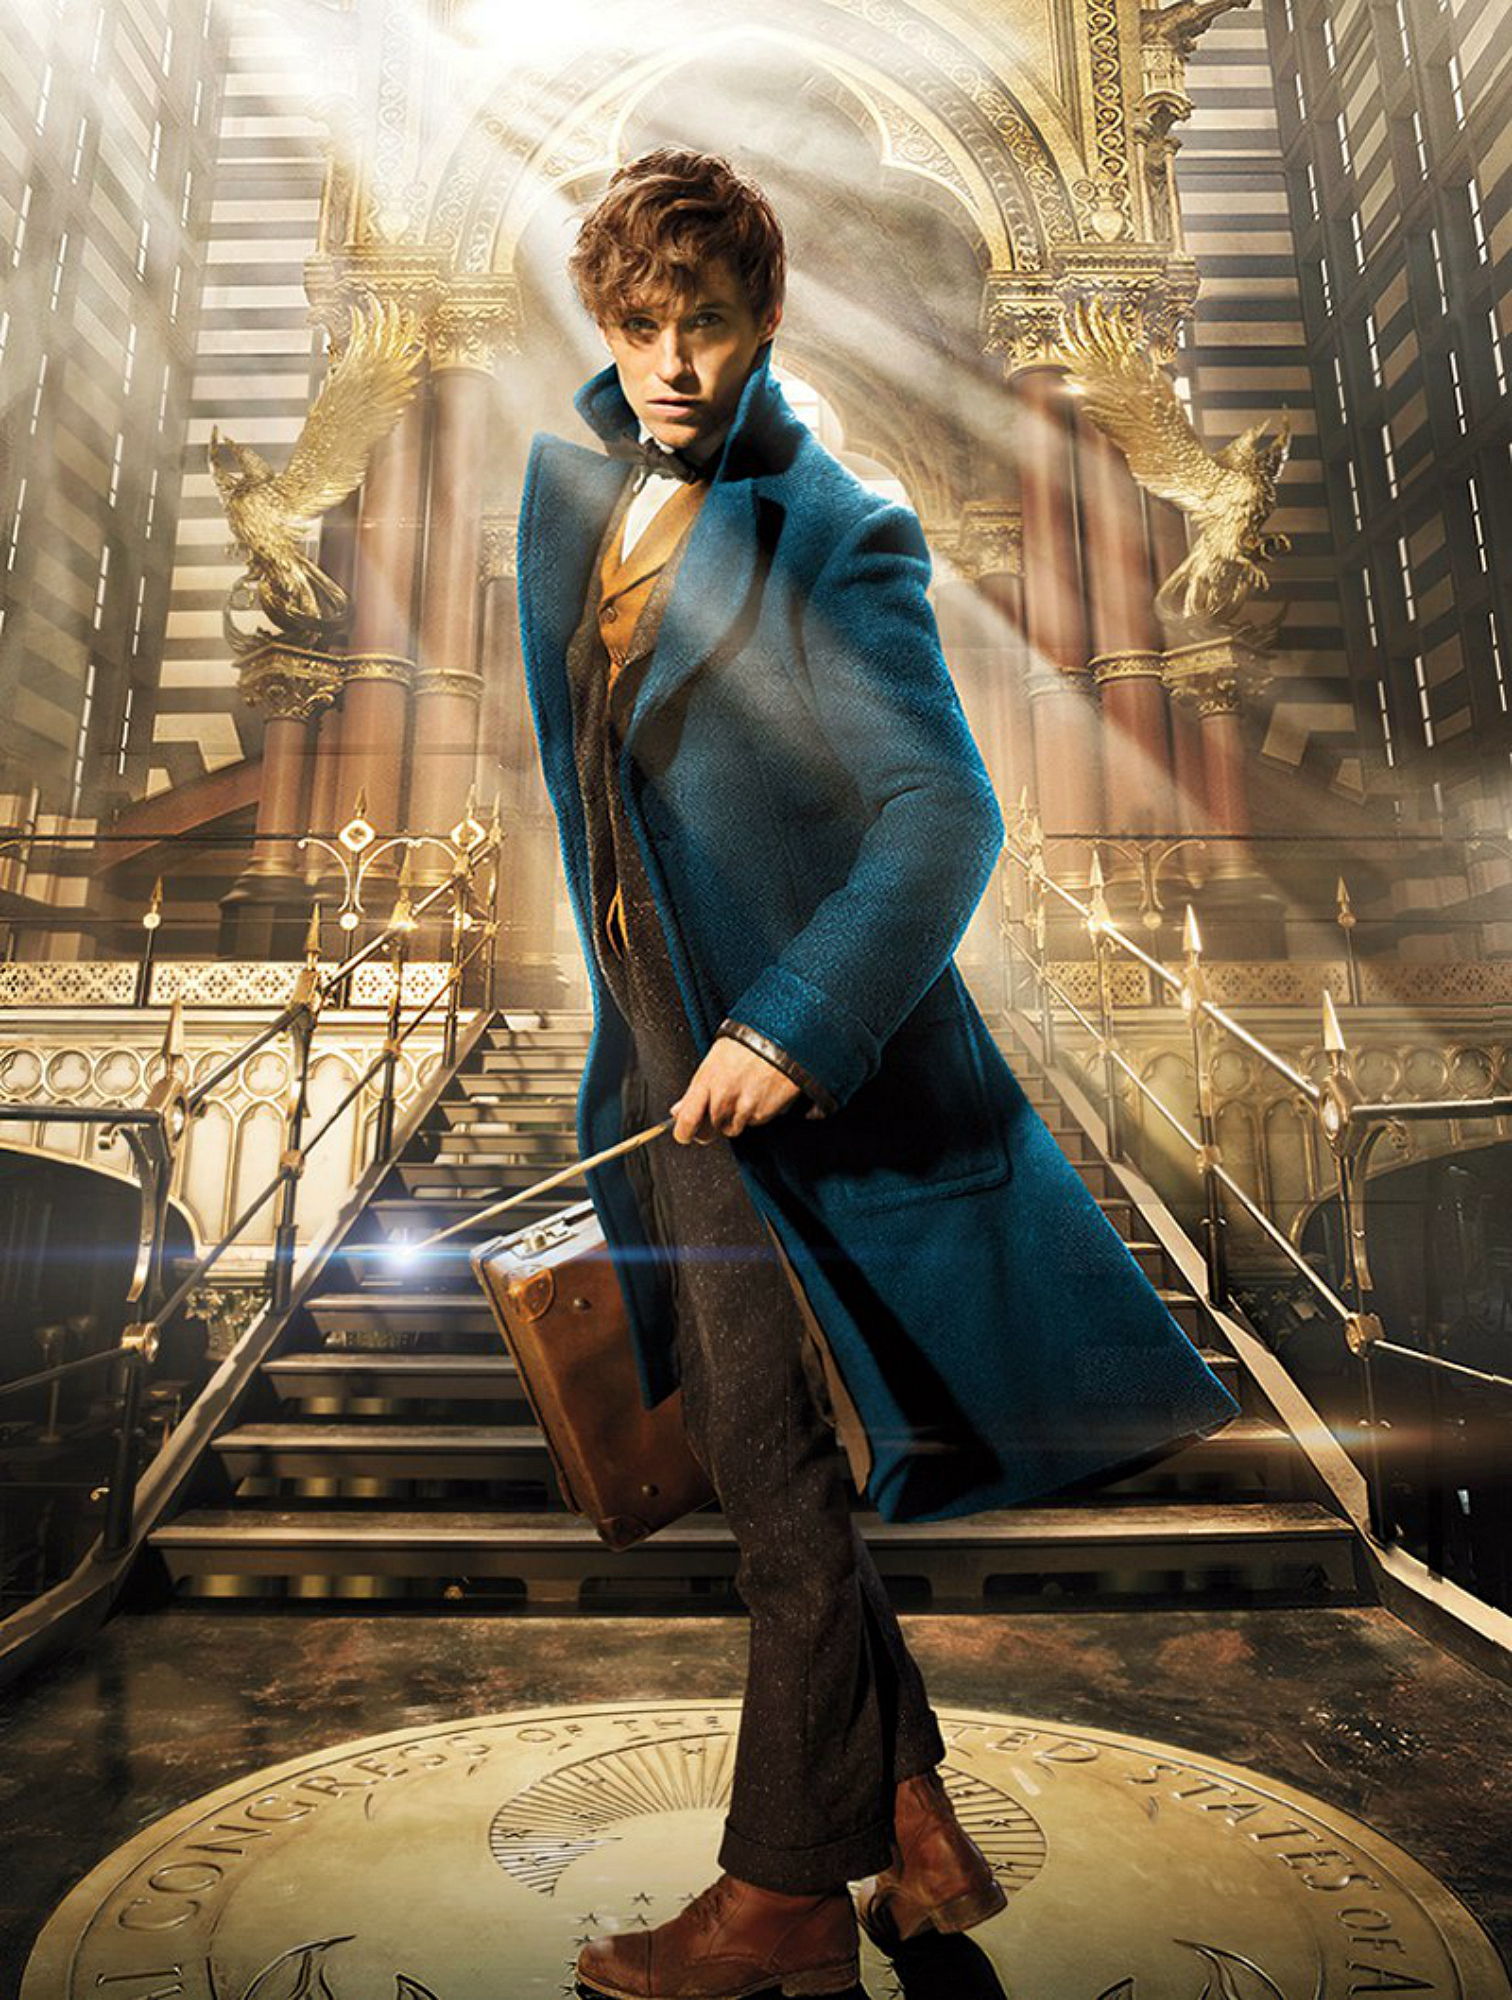 Fantastic Beasts And Where To Find Them Film 2016 Hd Online